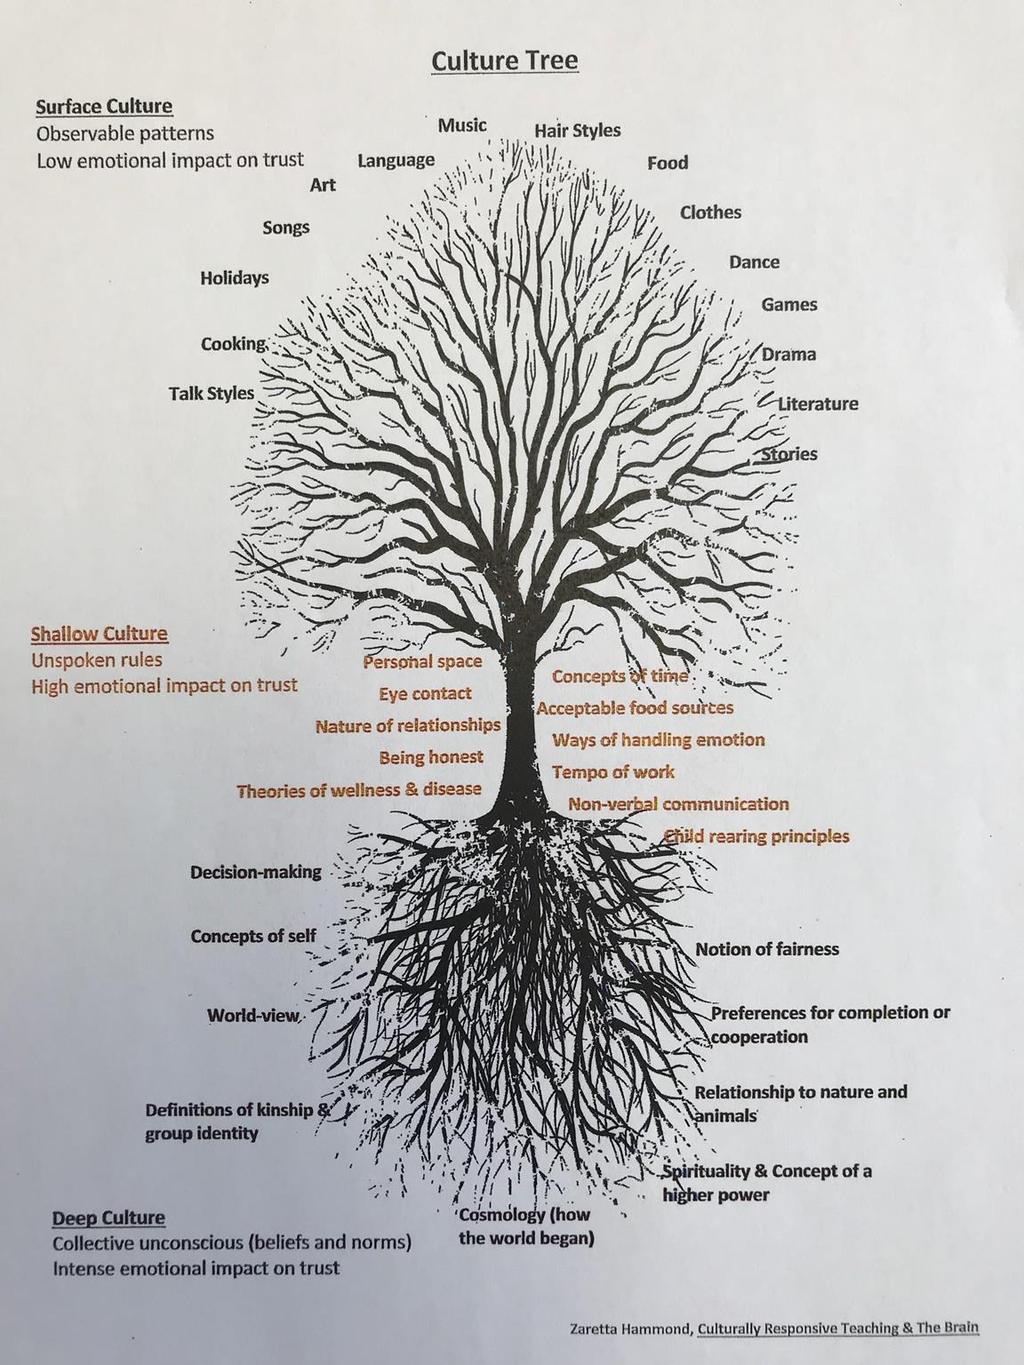 The Culture Tree Zaretta Hammond, Culturally Responsive Teaching & The Brain The Impact on Trust Surface Culture - Low emotional impact Shallow Culture - High emotional